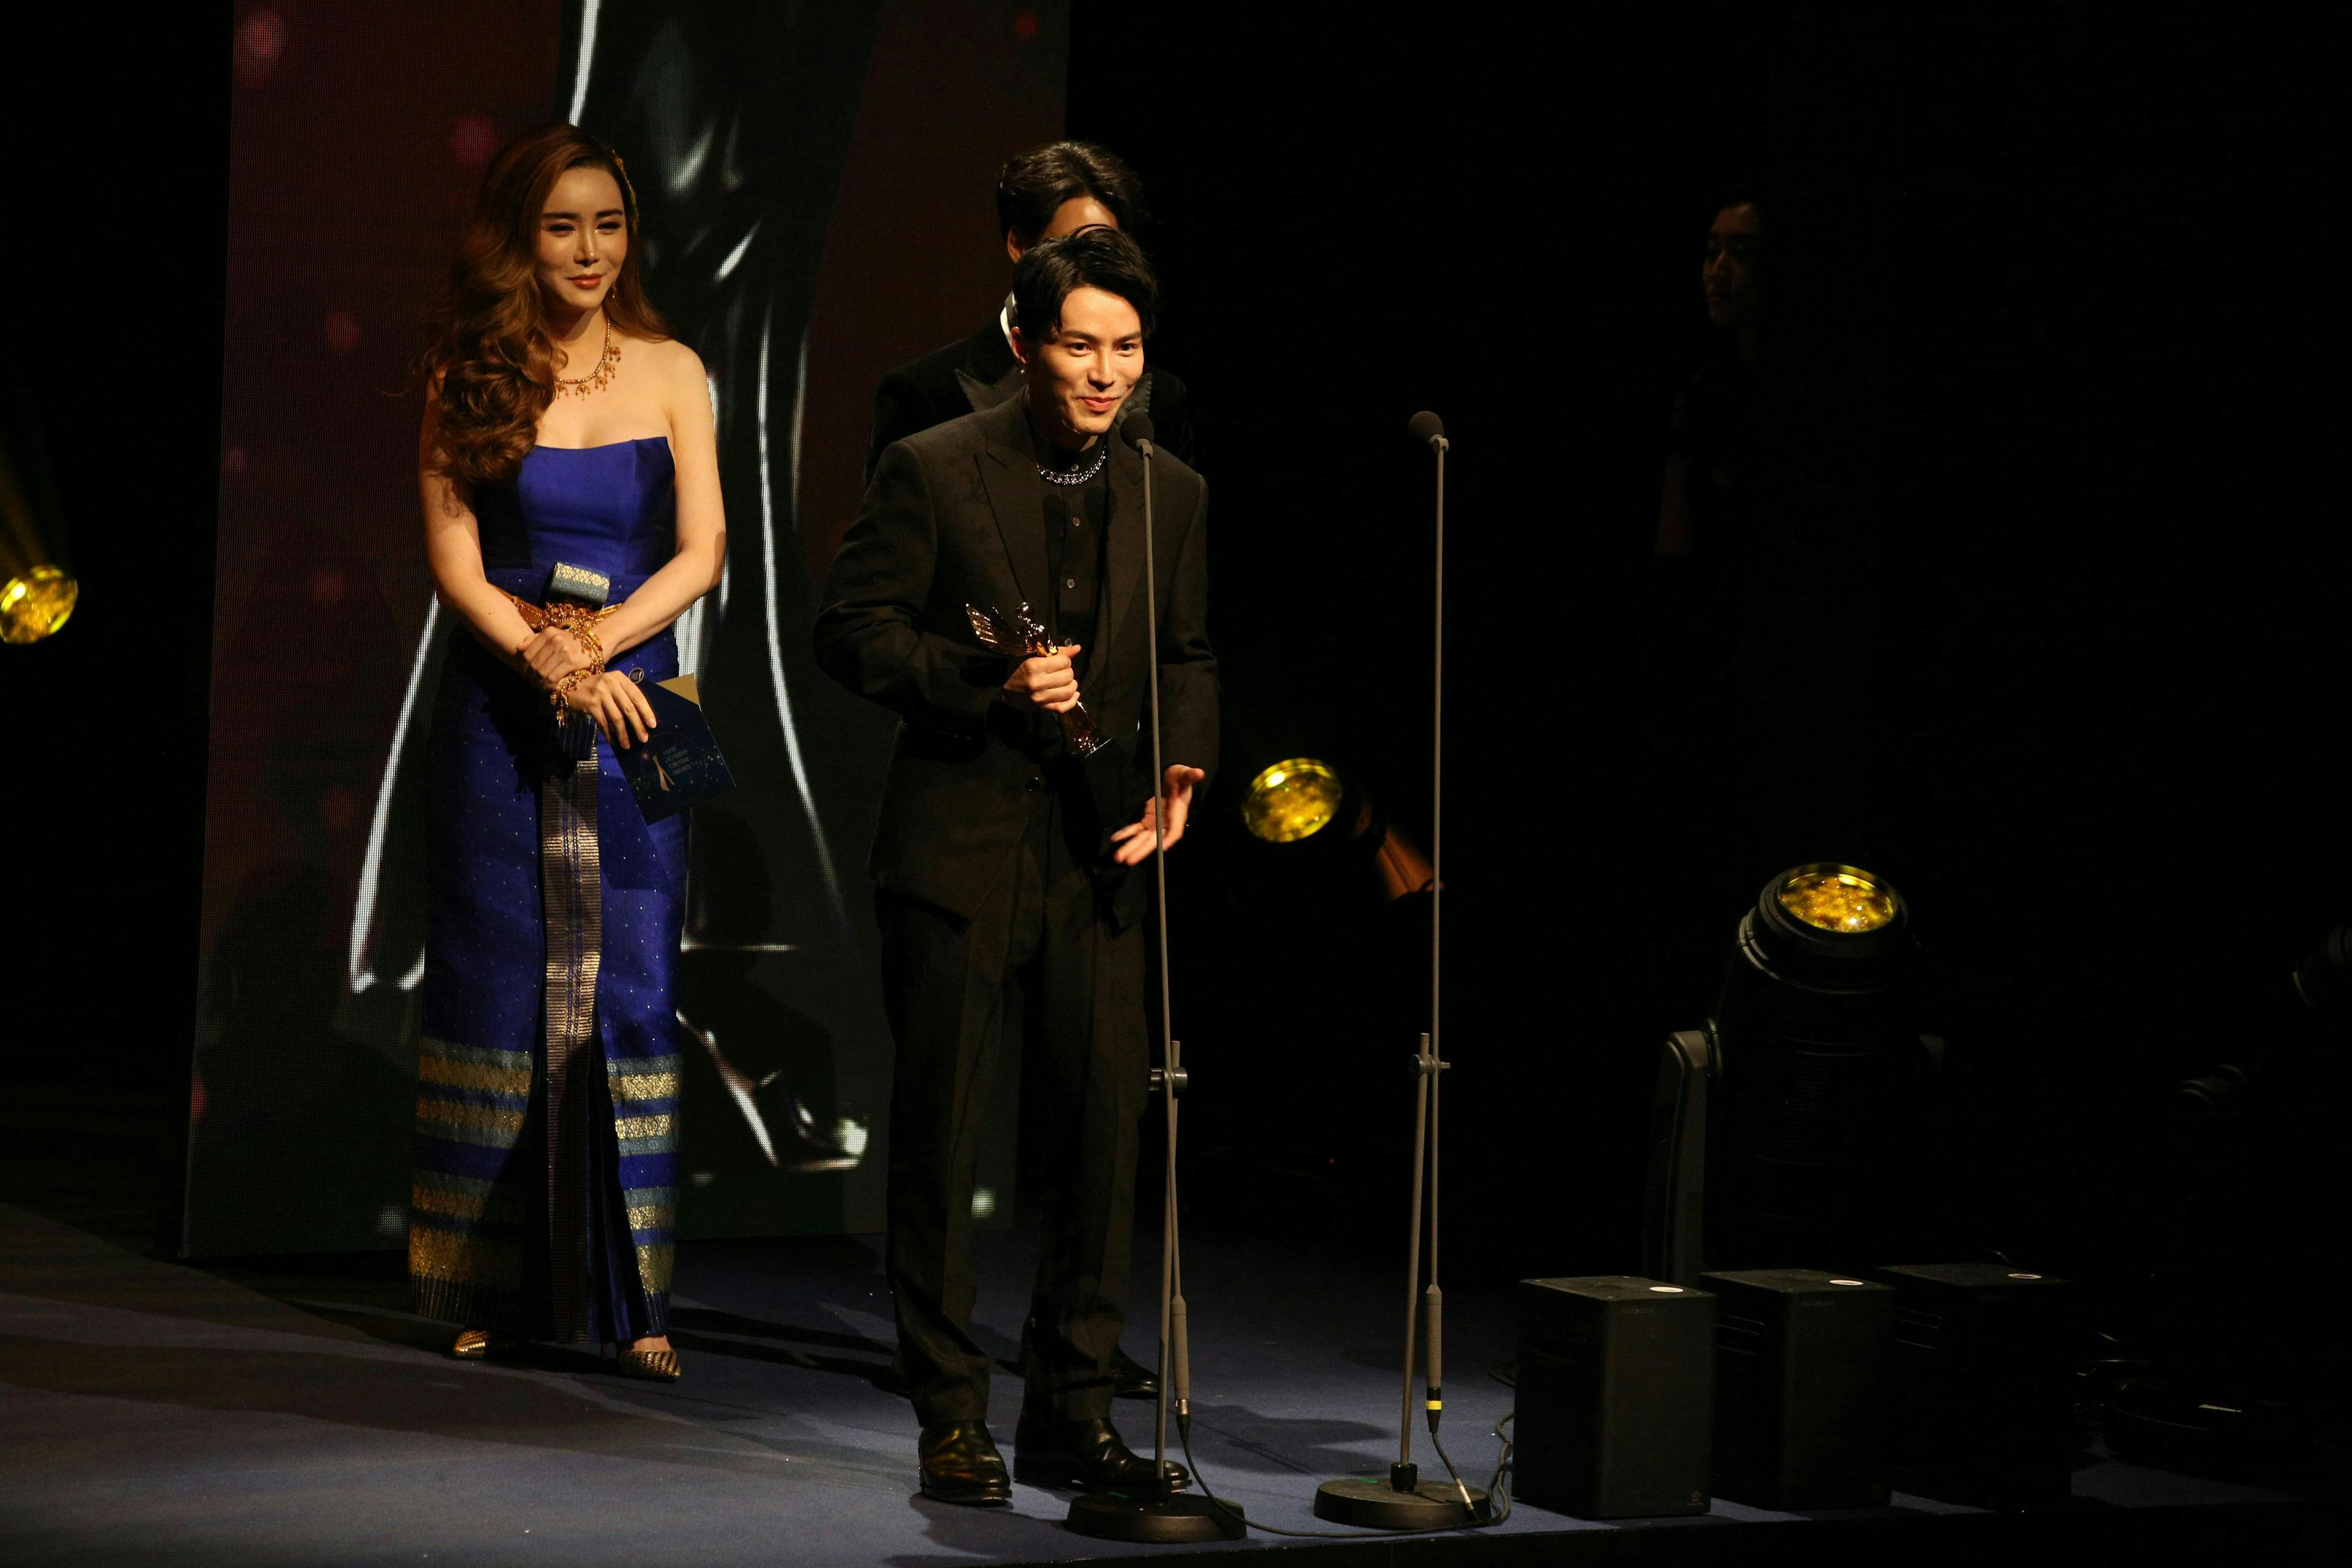 Lawrence Wong and Anne Jakrajutatip at the Asian Academy Creative Awards 2019